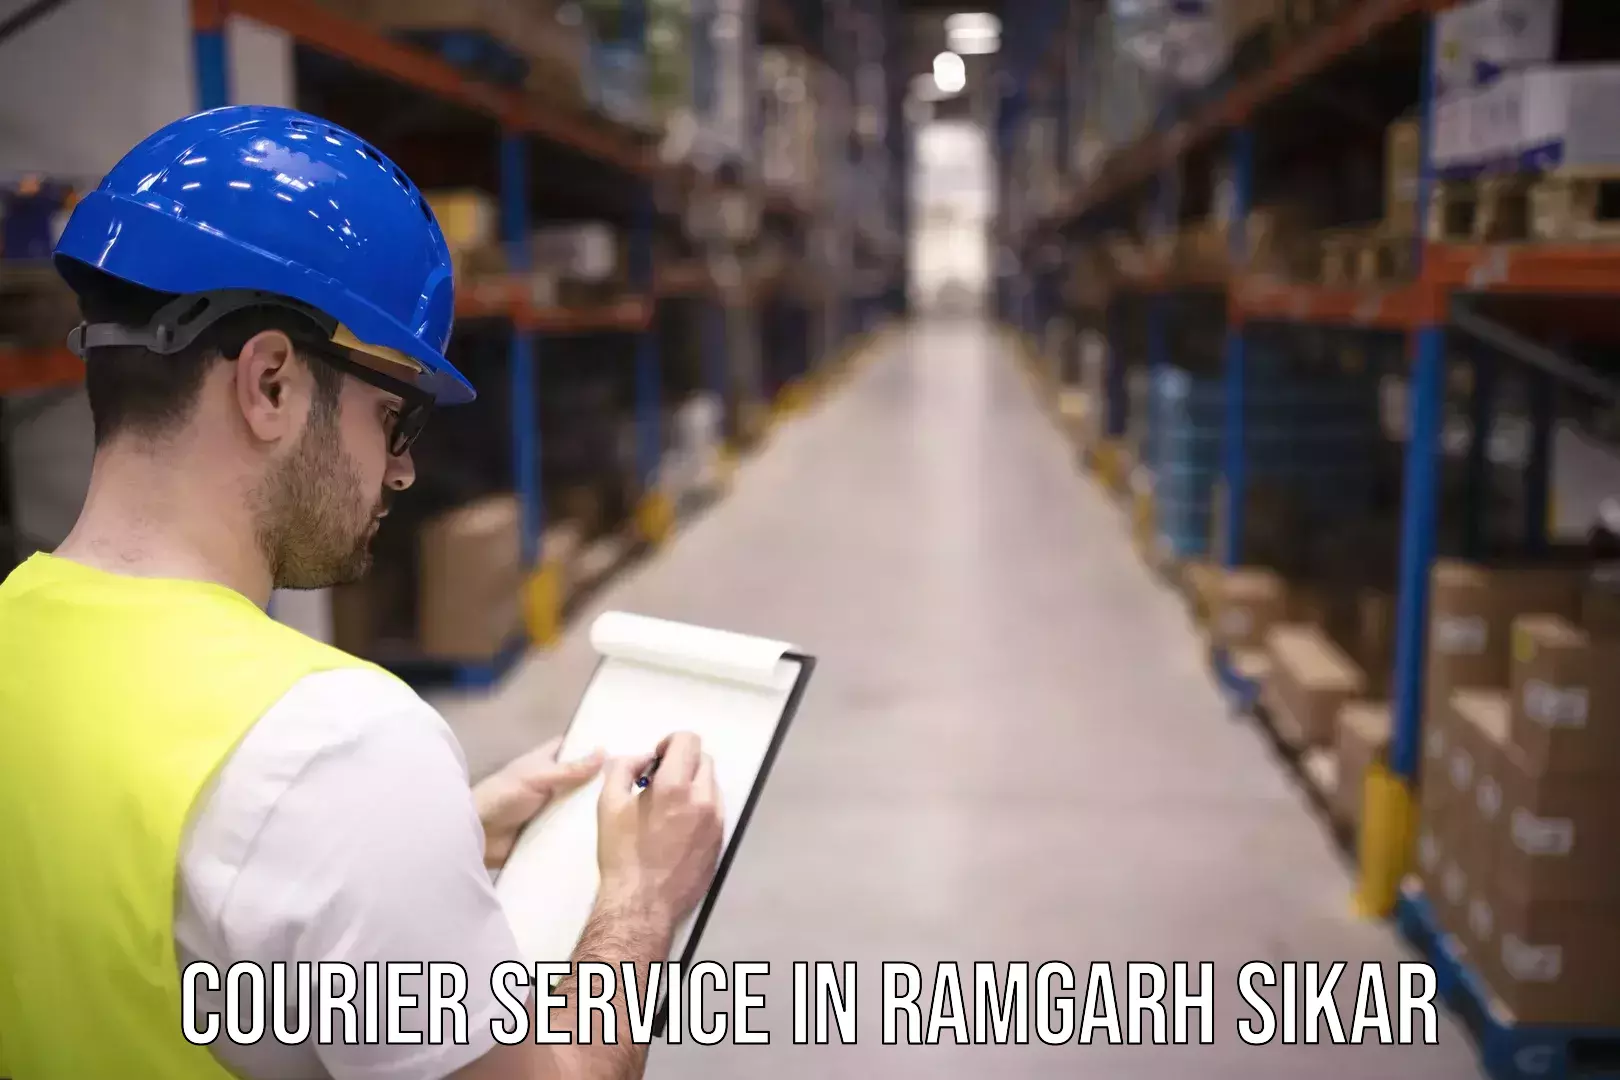 Affordable parcel service in Ramgarh Sikar